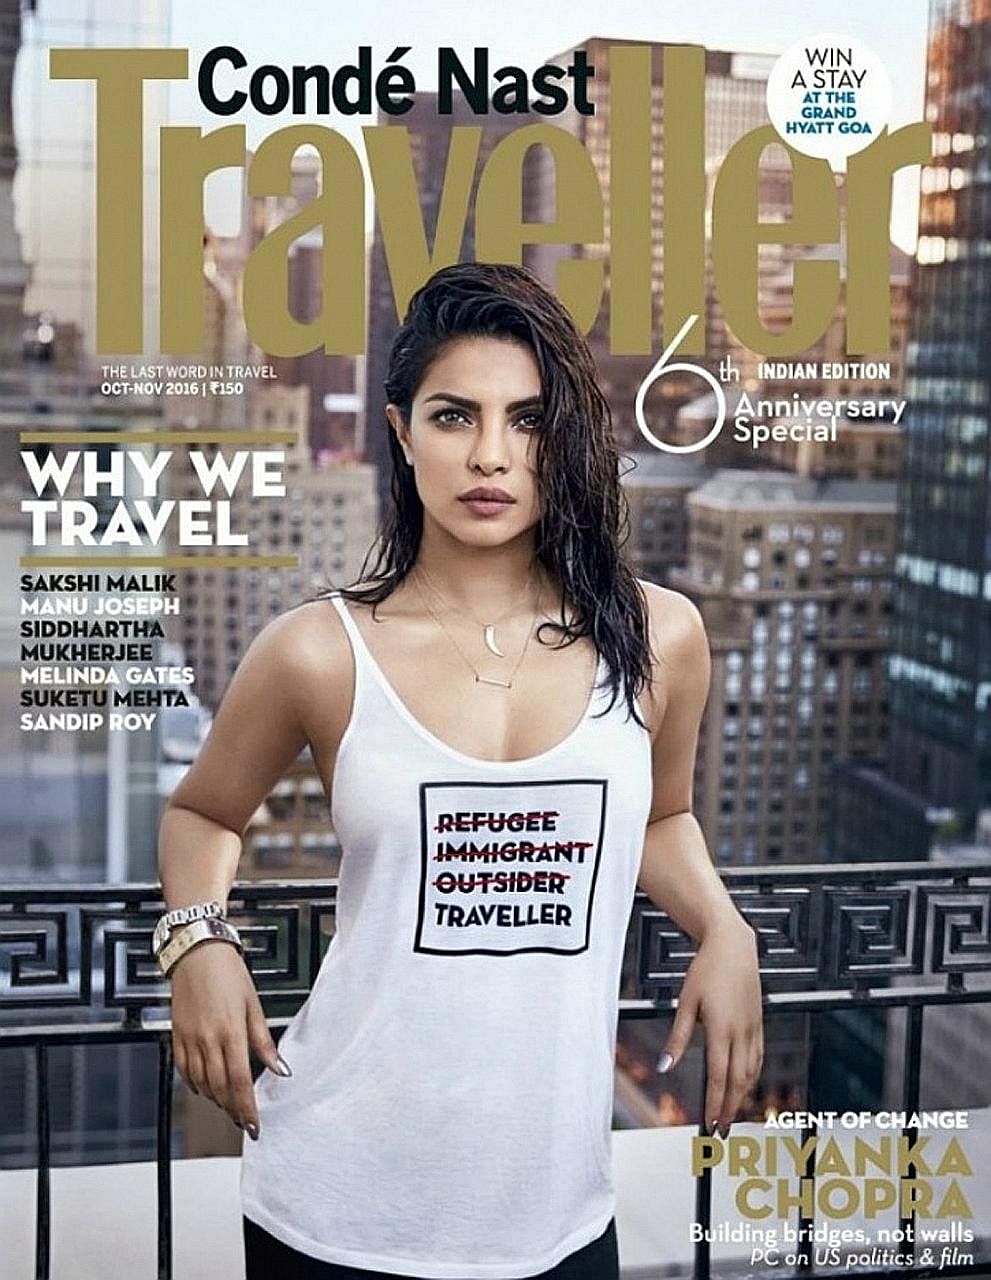 The magazine cover of Bollywood actress Priyanka Chopra prompted a flurry of criticism on social media.